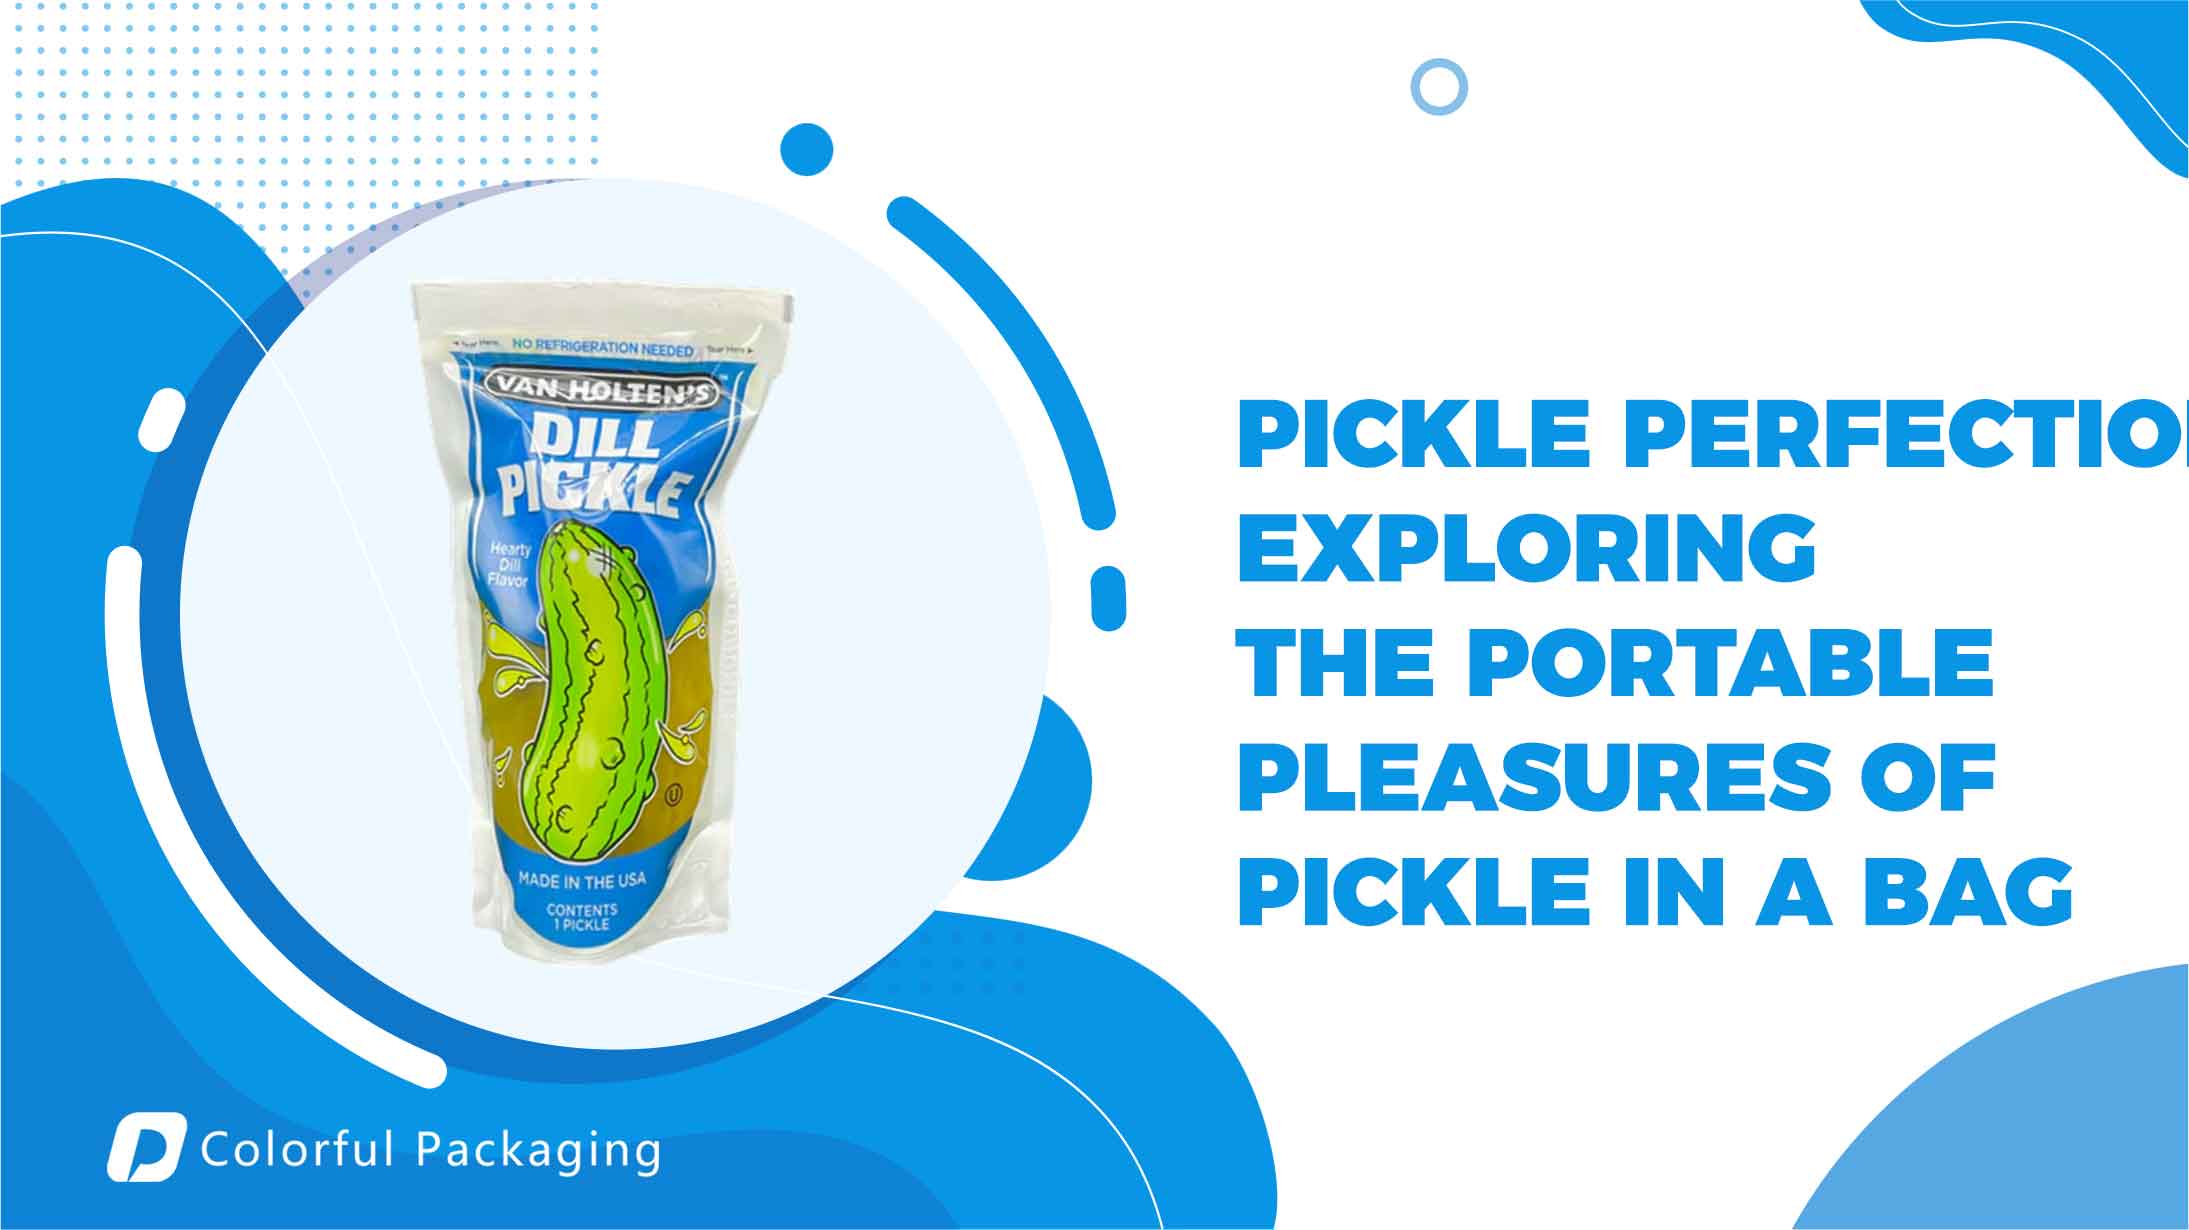 Pickle Perfection: Exploring the Portable Pleasures of Pickle in a Bag